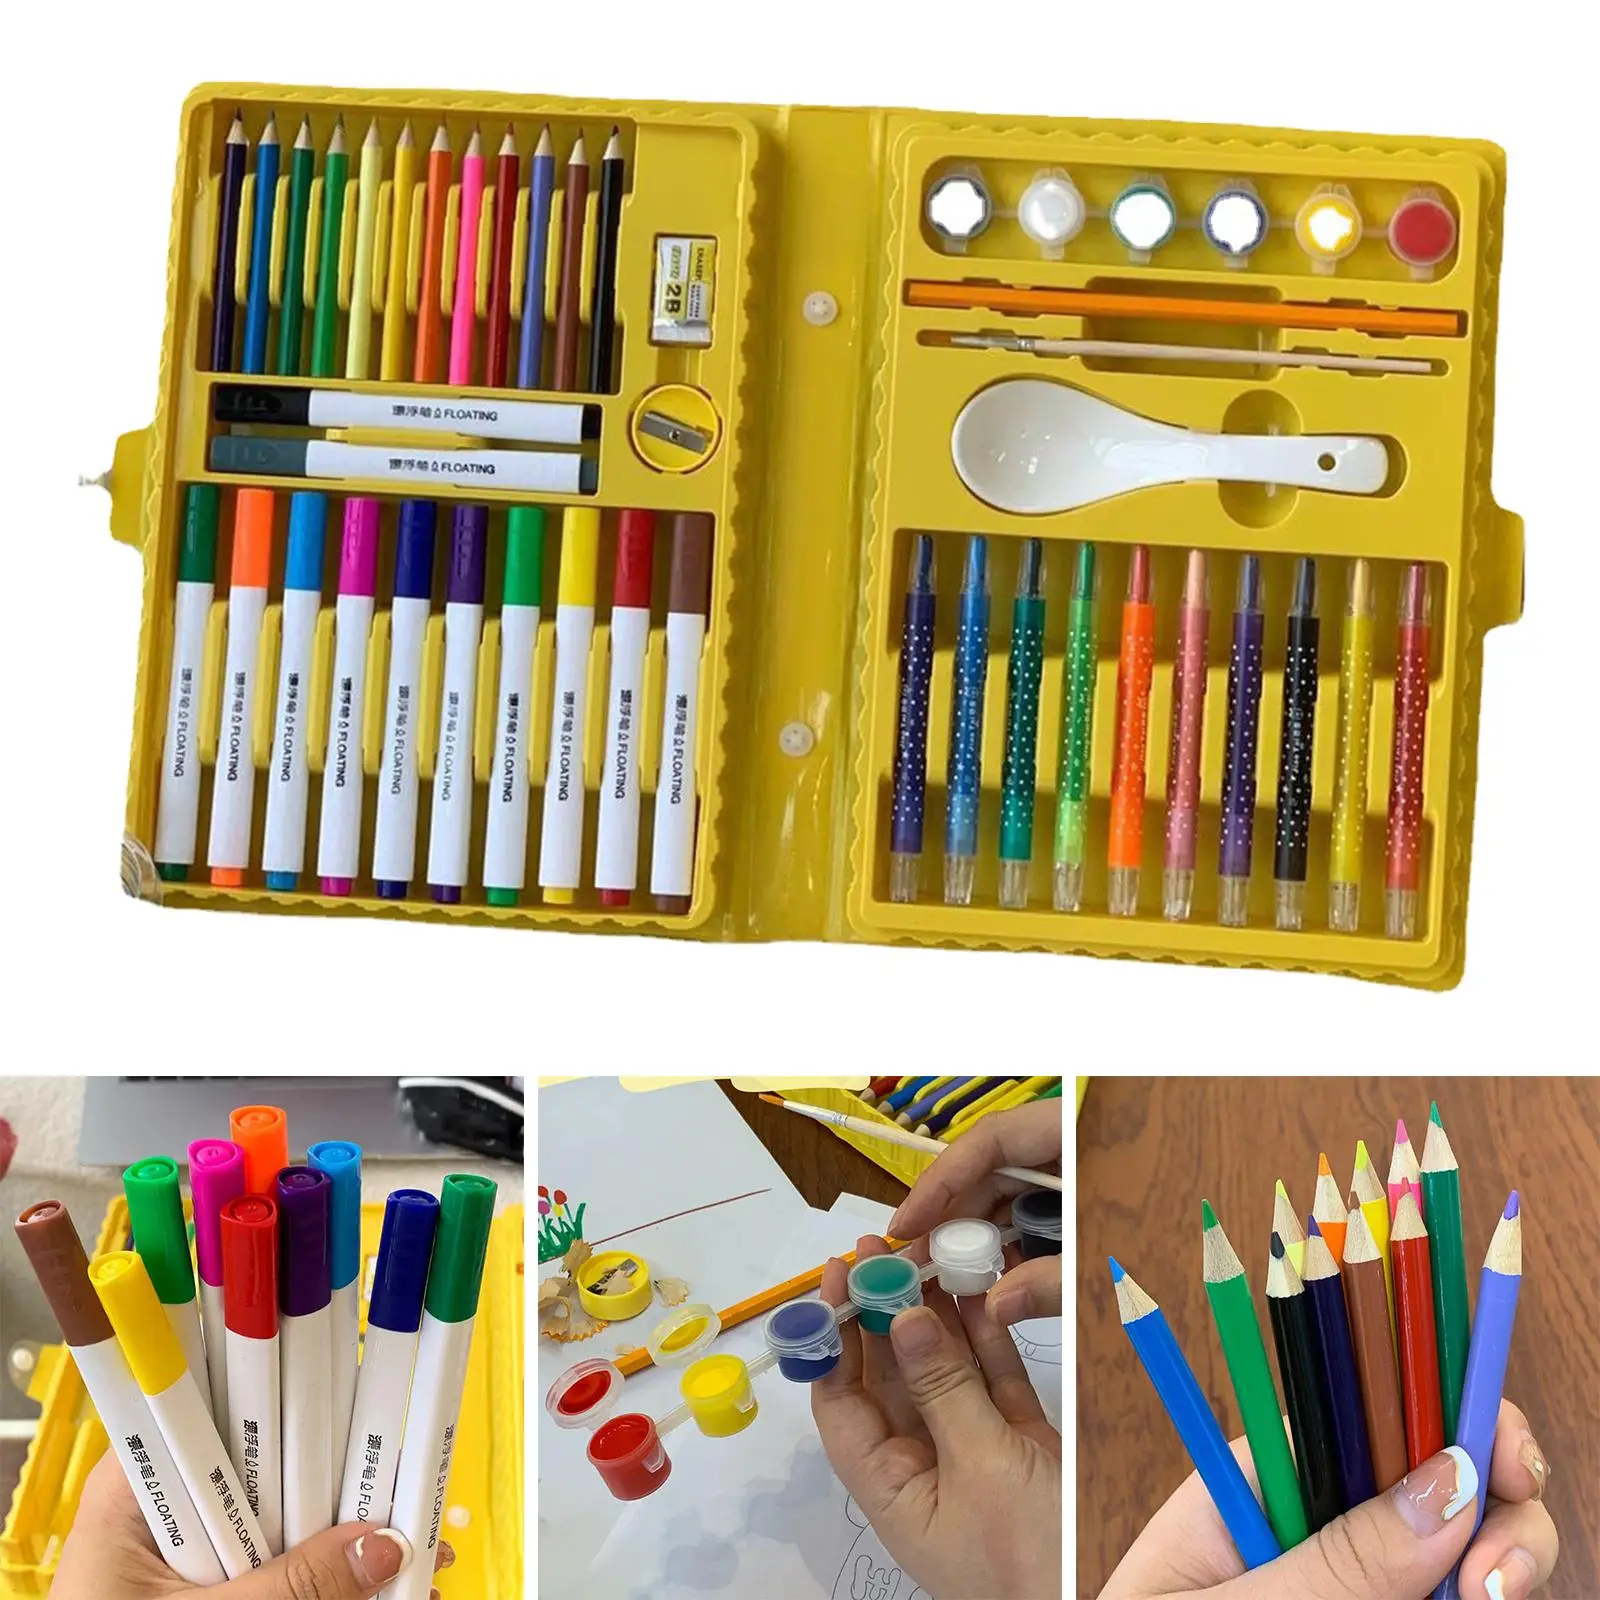 46 Pieces Floating Marker Pens Assorted Colors Multifunctional with spoons White Board Pen for Graffiti Gift Home Office Boards